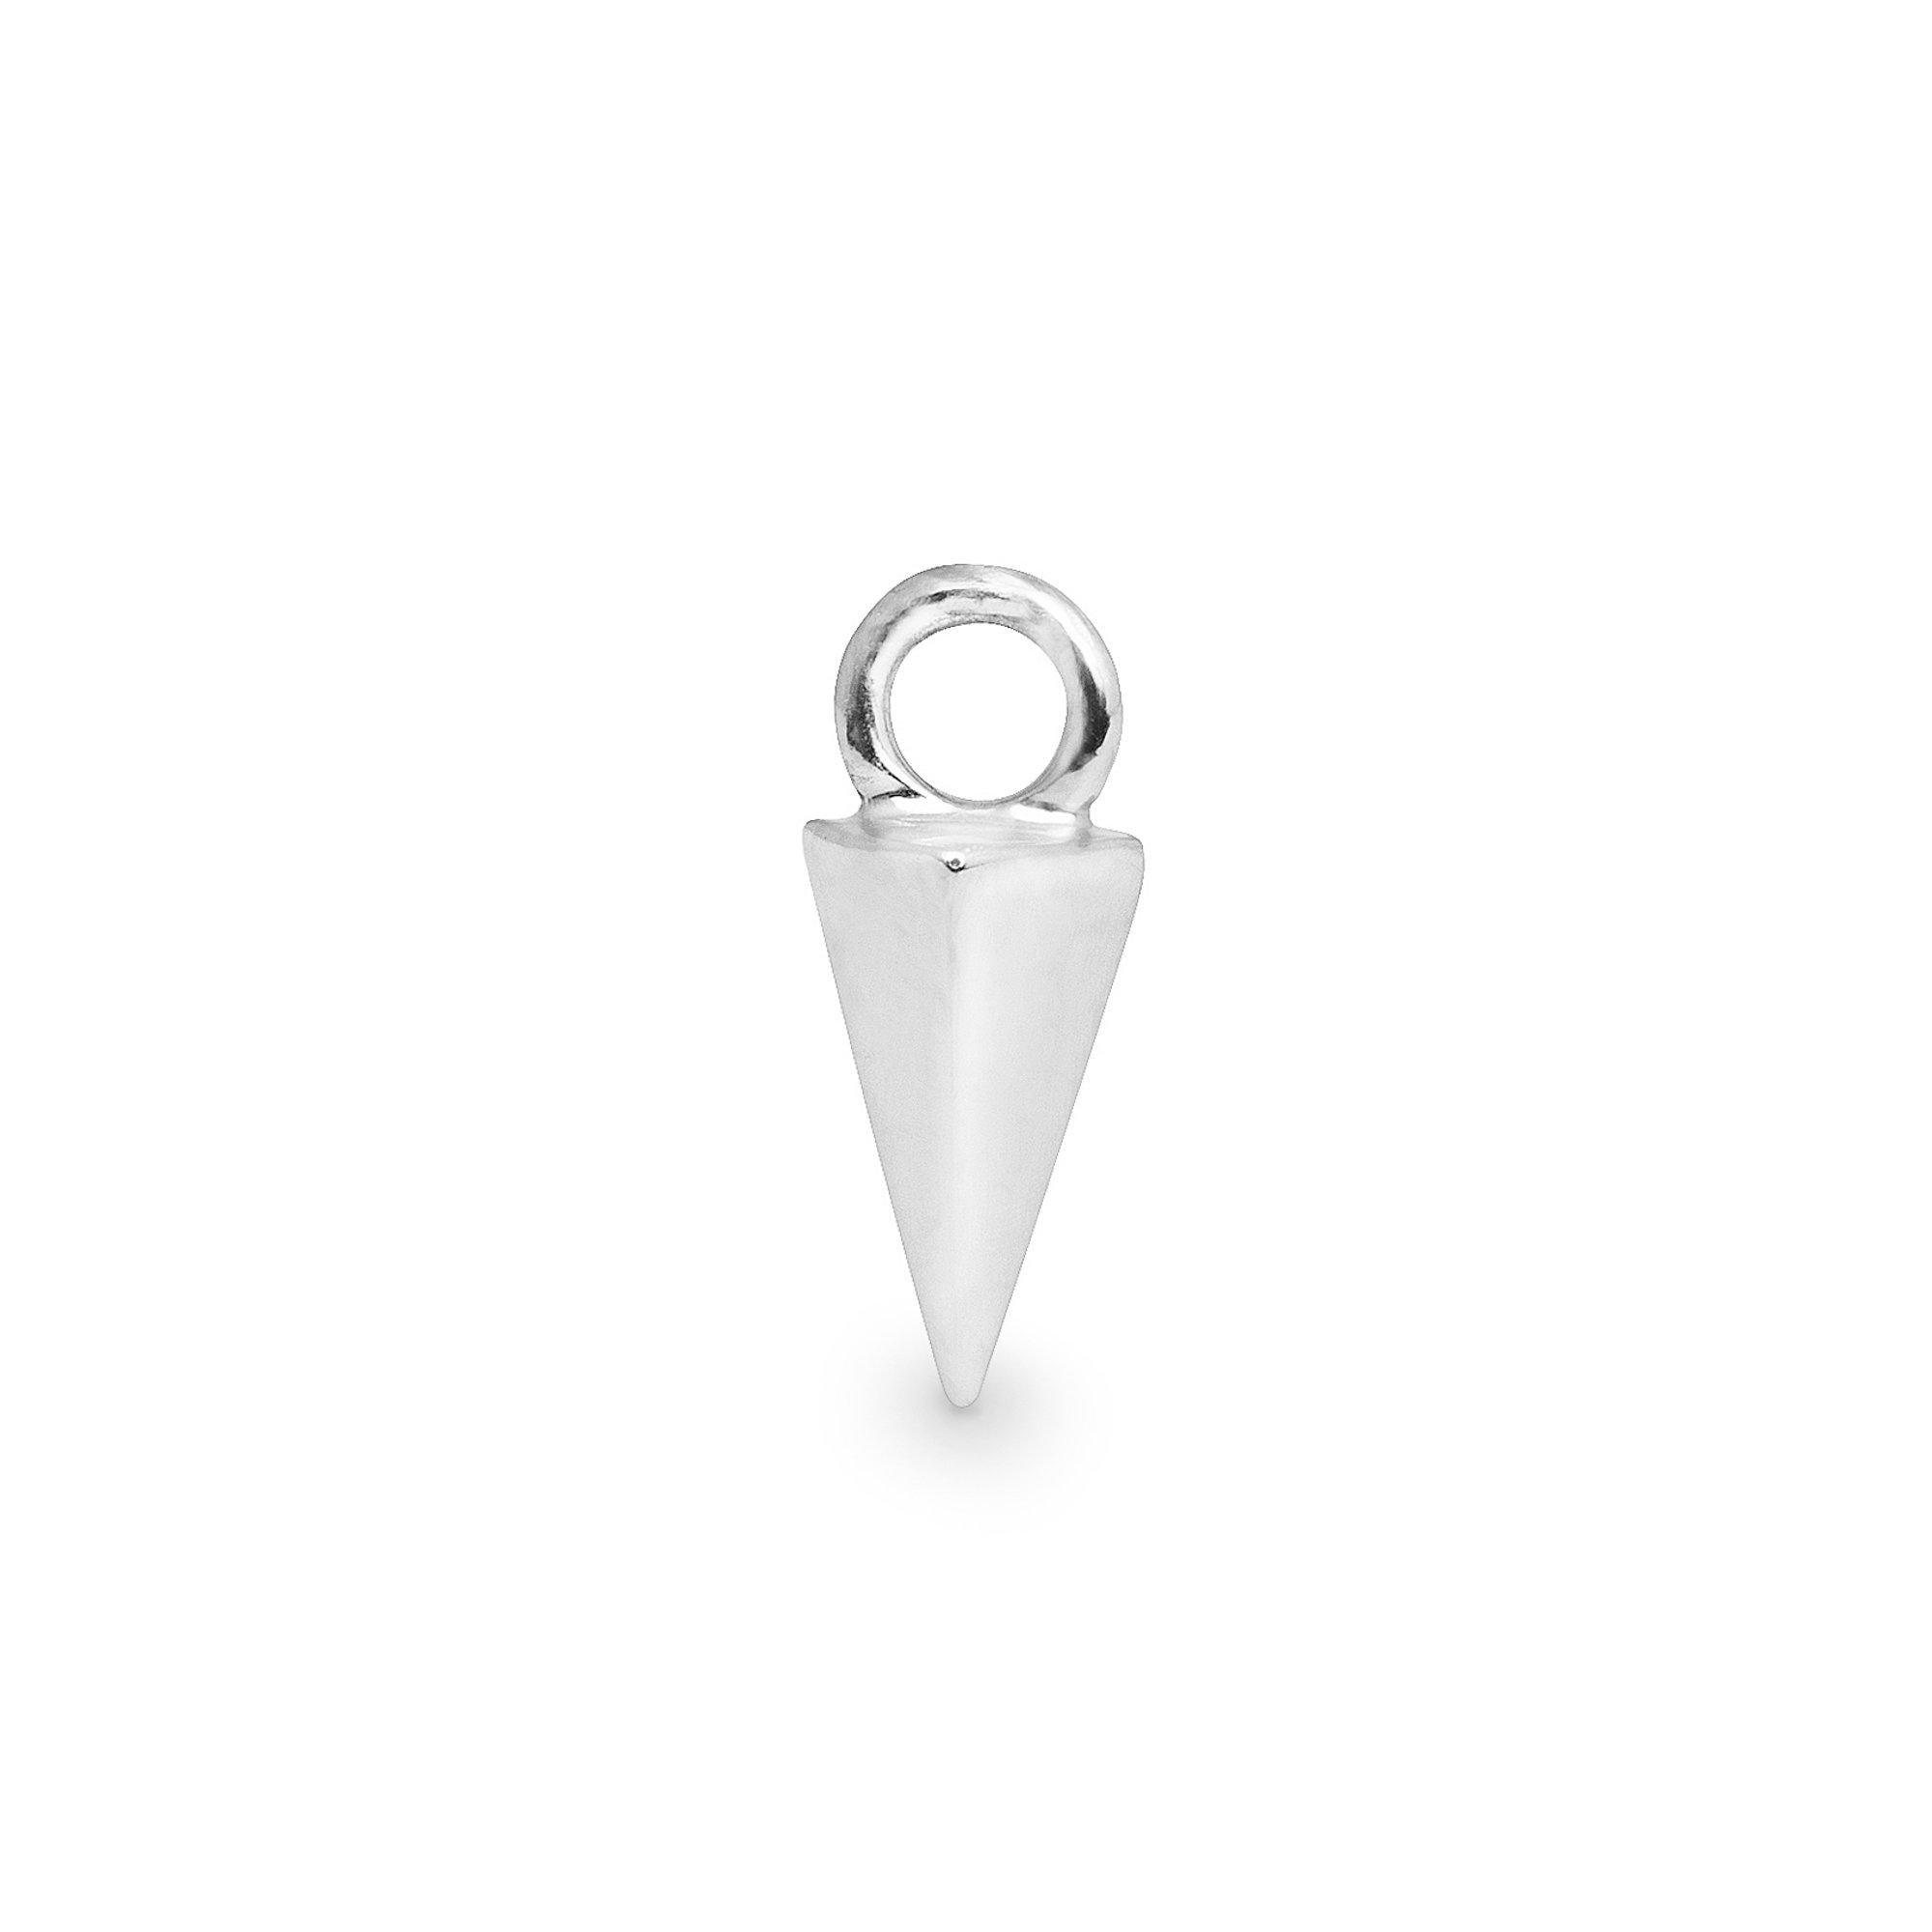 Picco 9k single solid white gold tiny spike charm for hinged segment earring - Helix & Conch